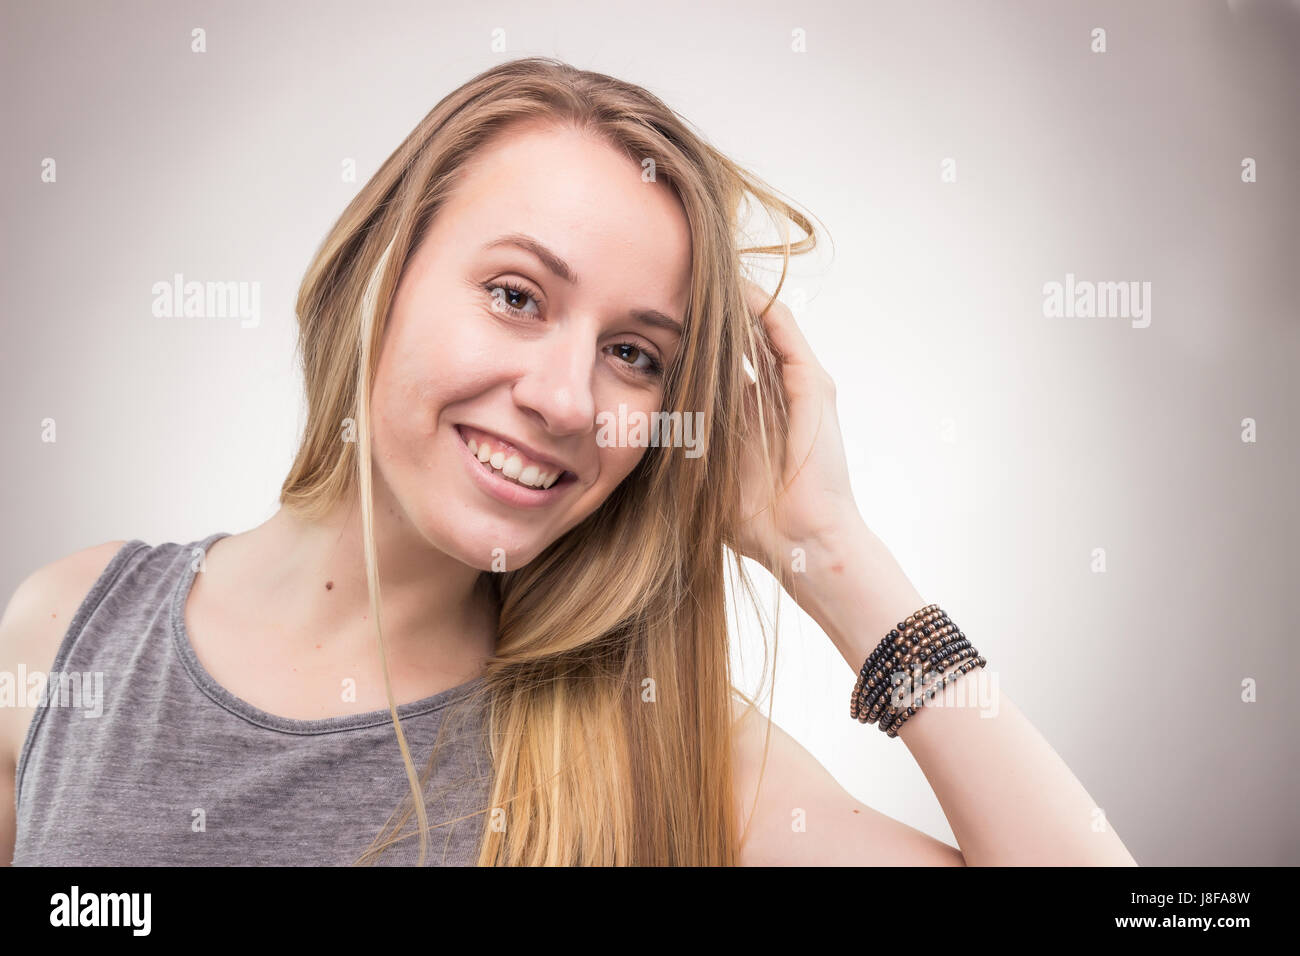 candid portrait, one young adult woman only, studio background, casual clothes, head face headshot, Stock Photo